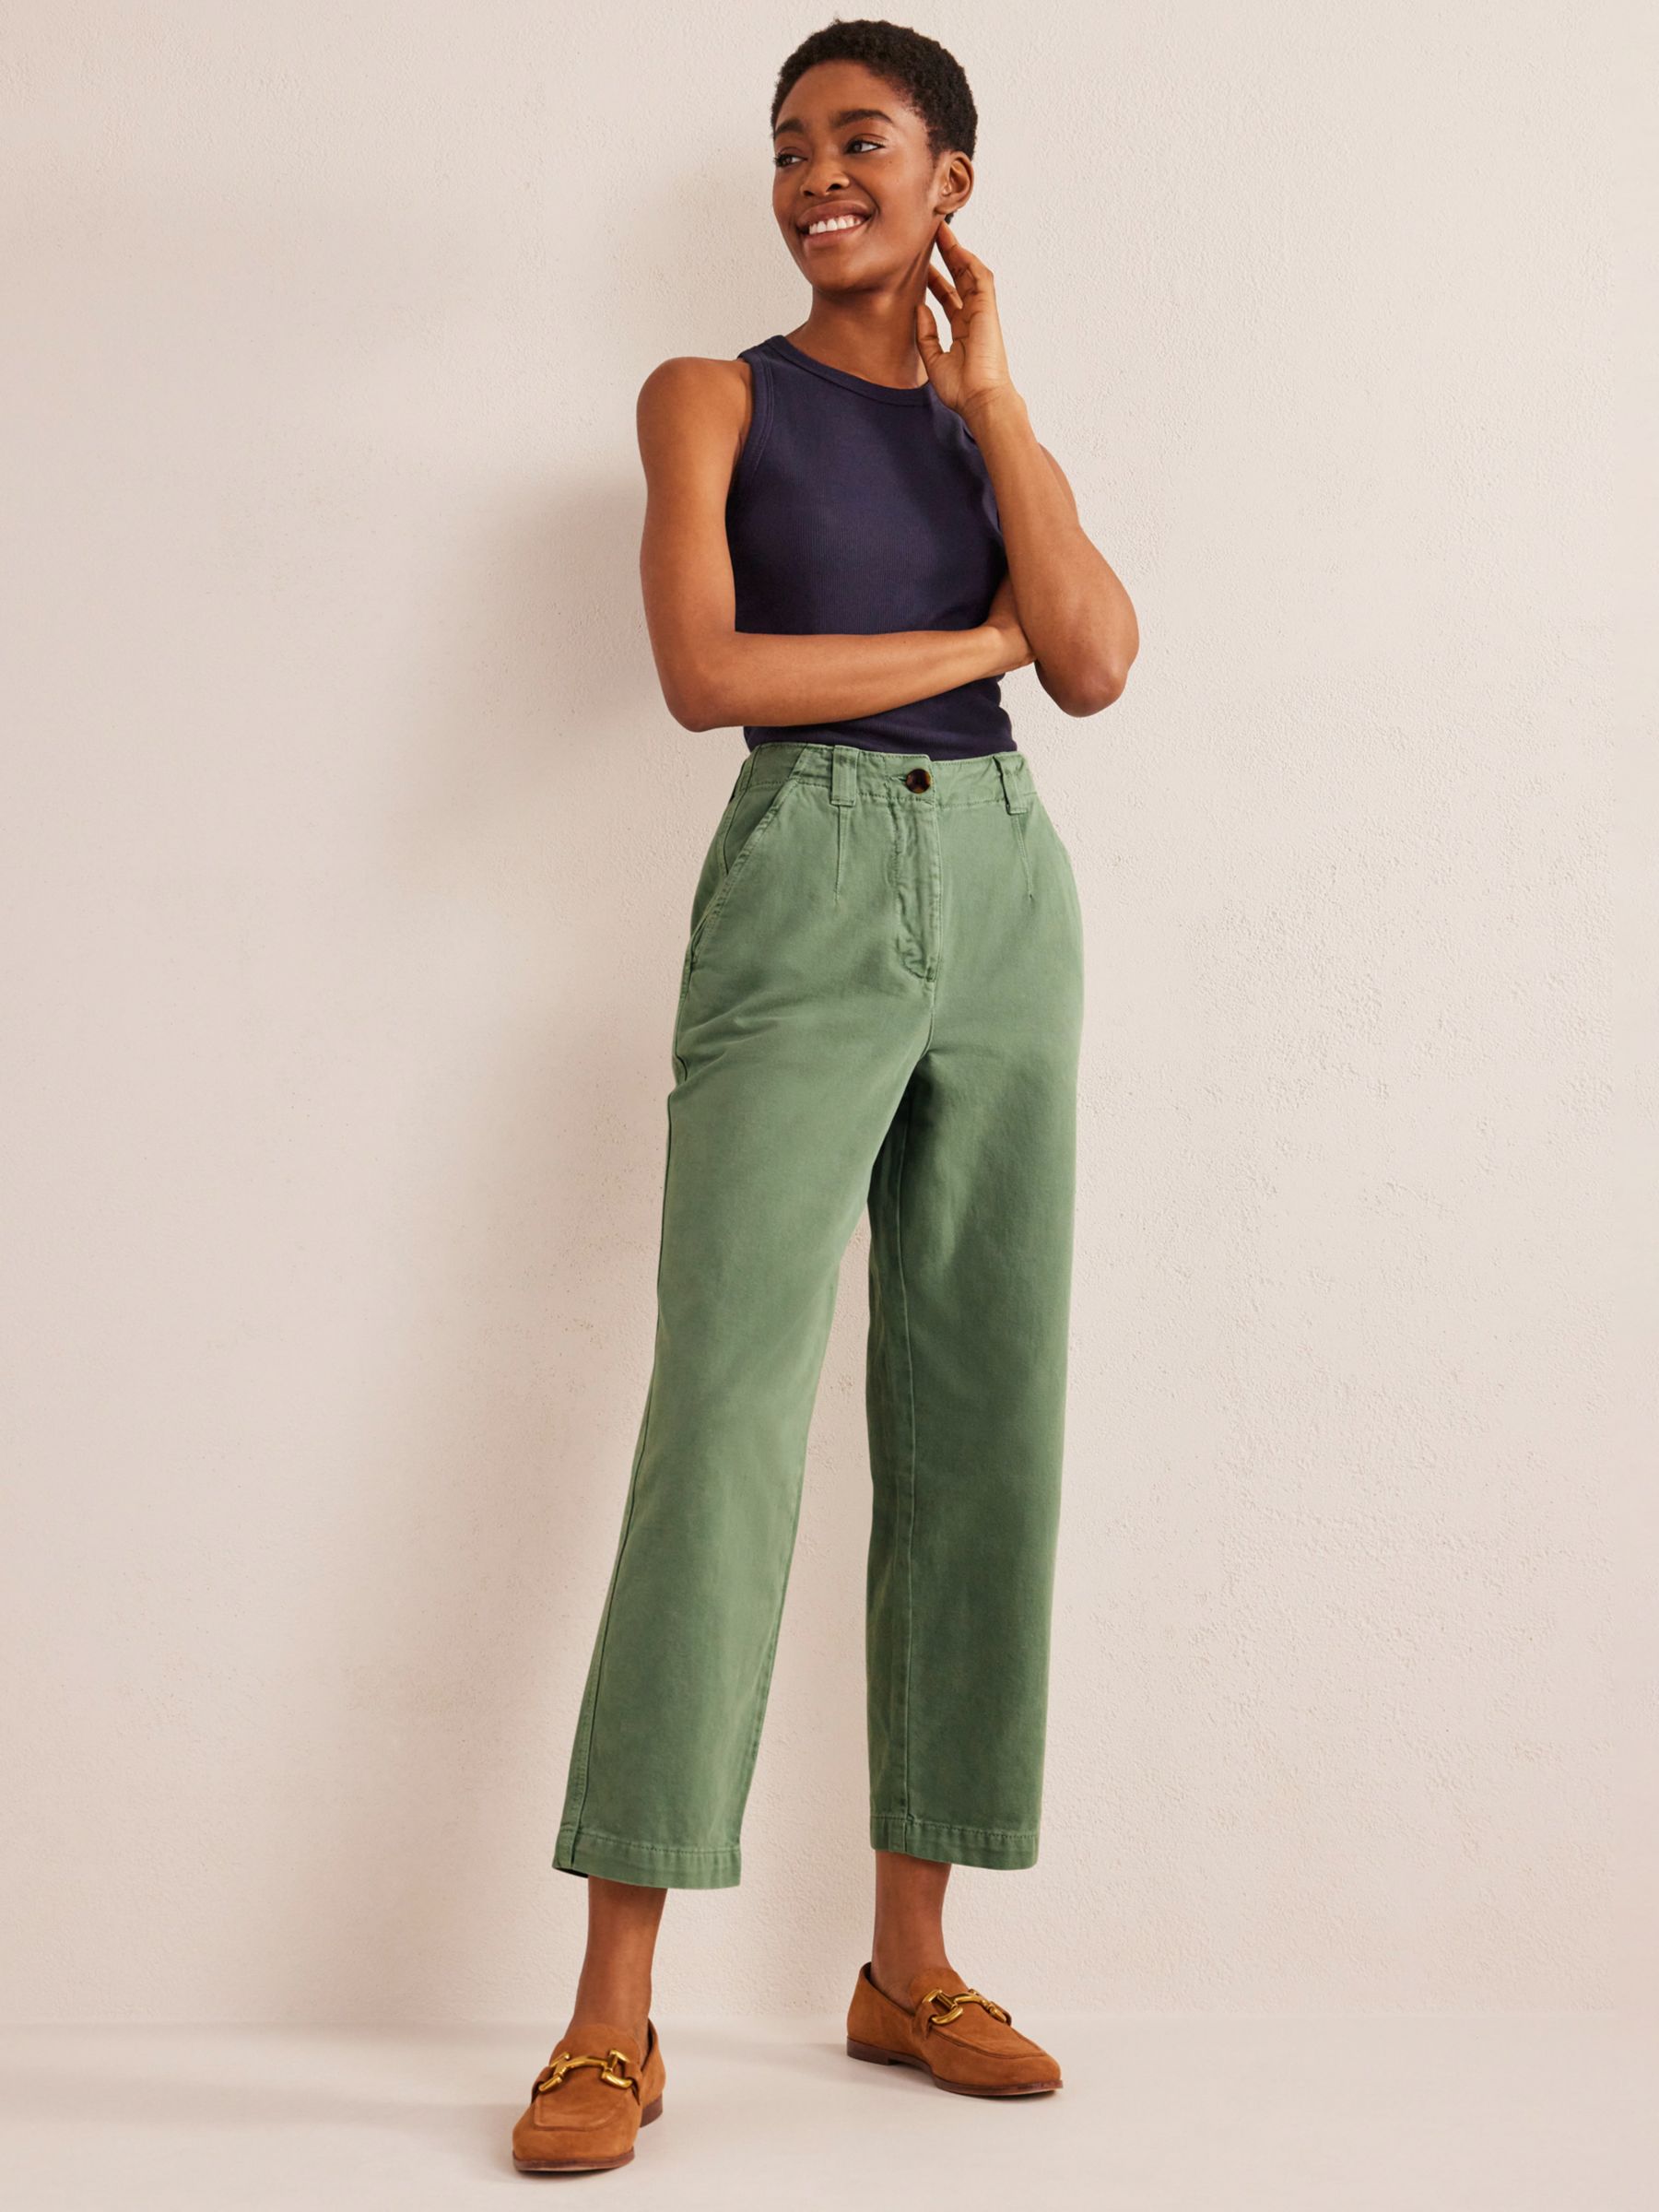 Boden Everyday Soft Cropped Trousers, Seaspray at John Lewis & Partners